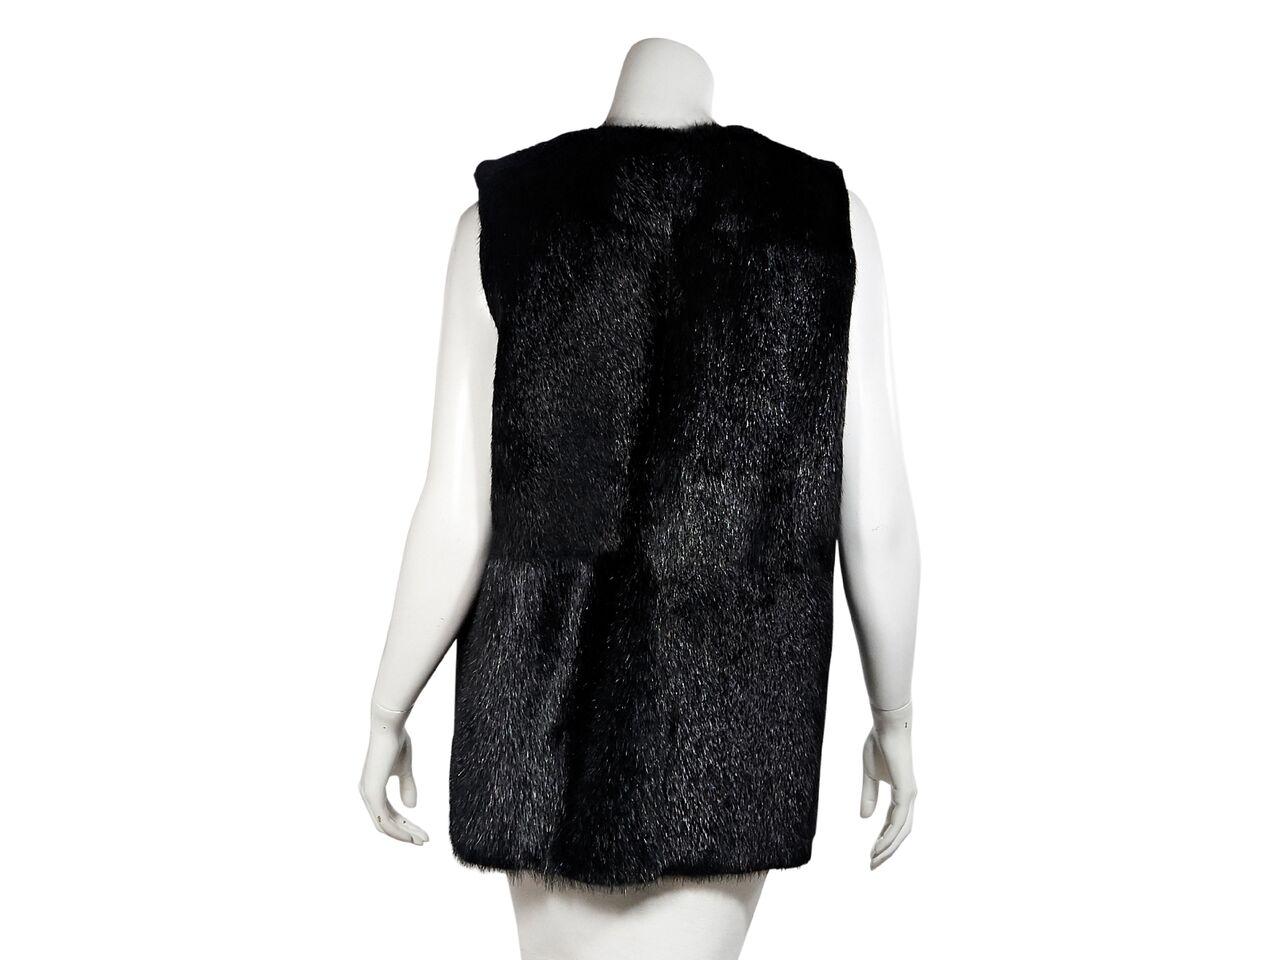 Product details:  Black nutria fur long vest by Theory.  Jewelneck.  Sleeveless.  Concealed hook and eye closure.  36